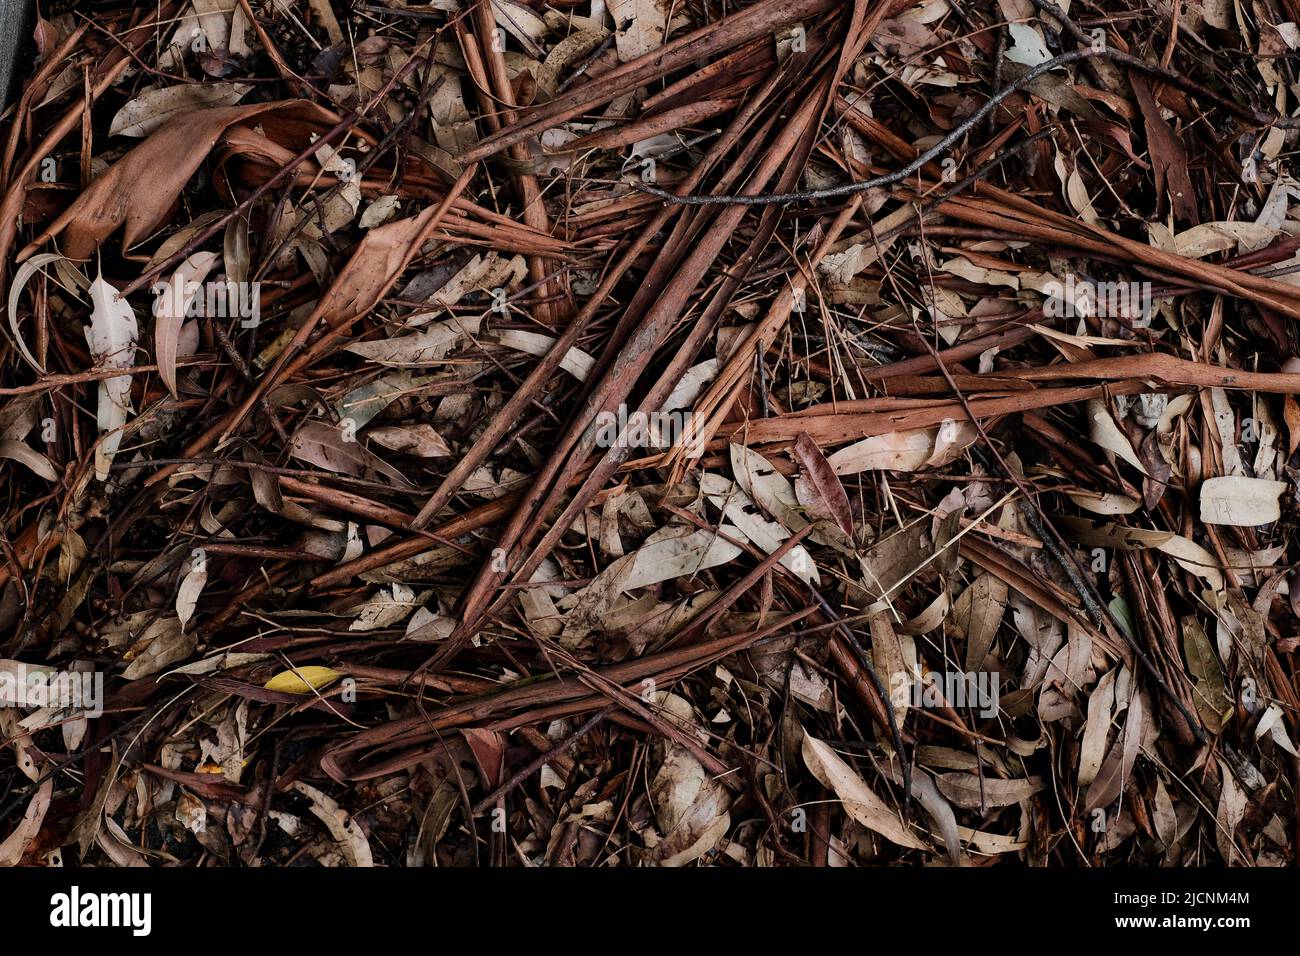 A closeup image of parched dry withered Australian bush ground cover. Stock Photo